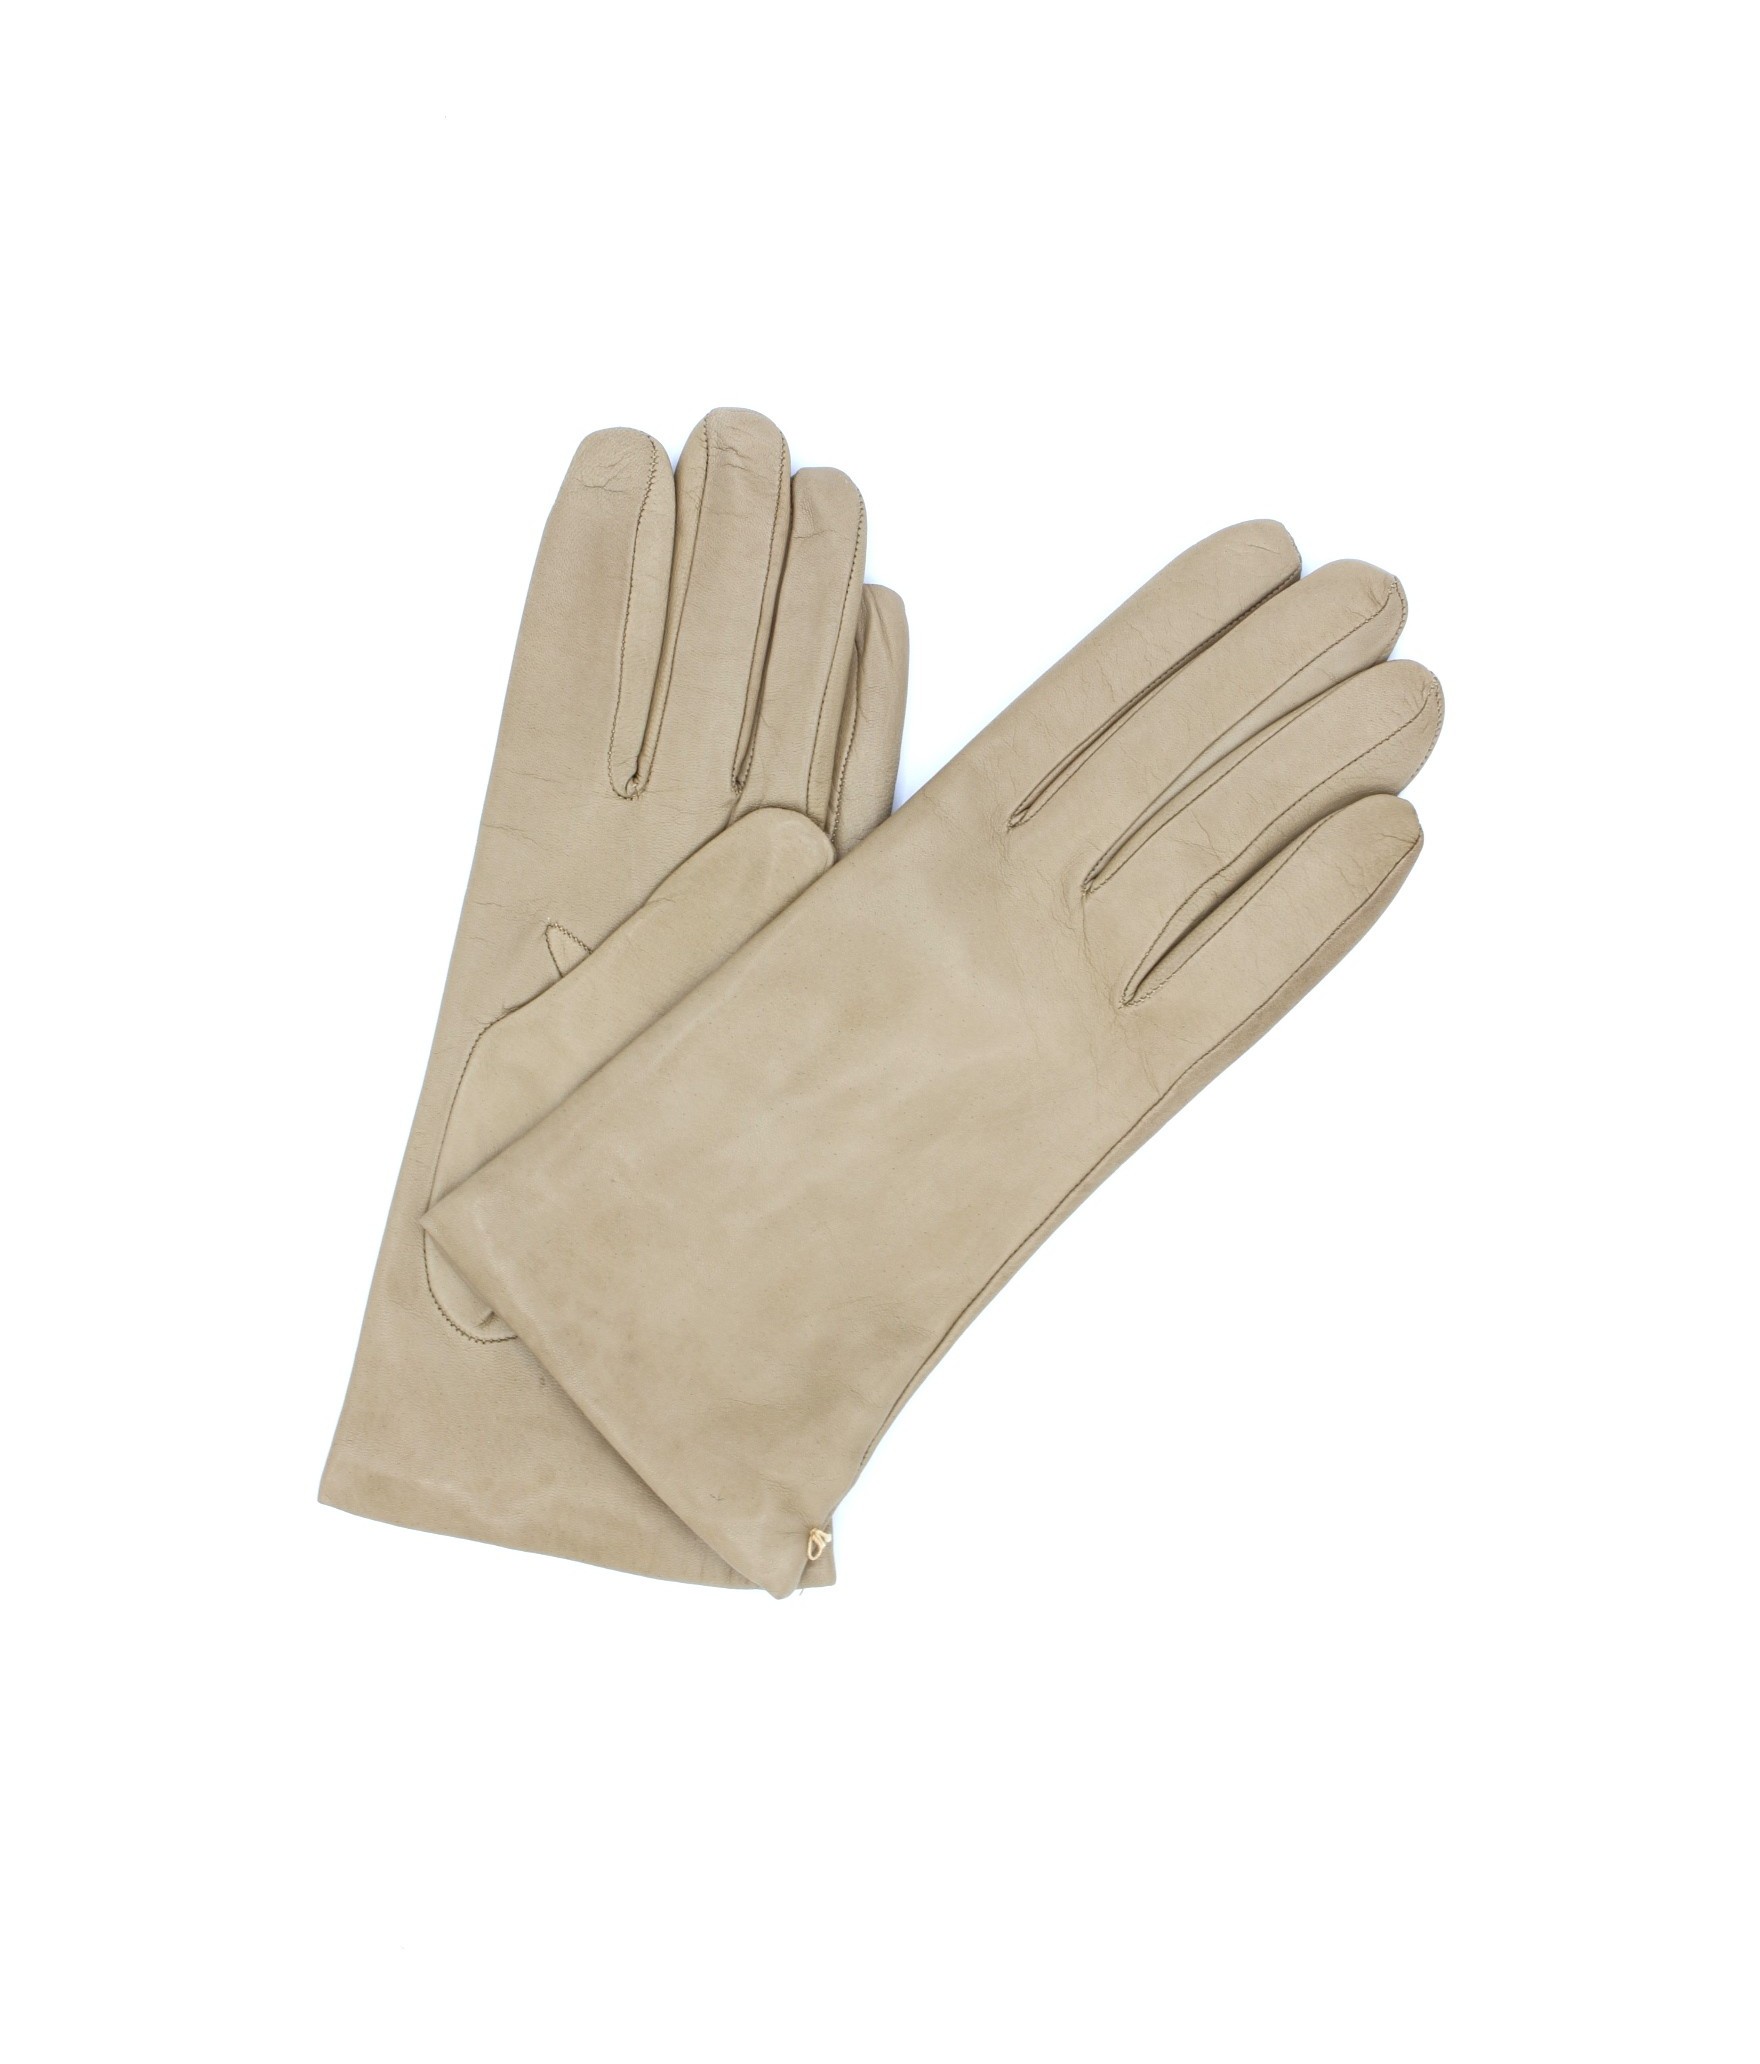 1011 Classic Kid Leather Gloves Cashmere Lined Beige/Taupe 